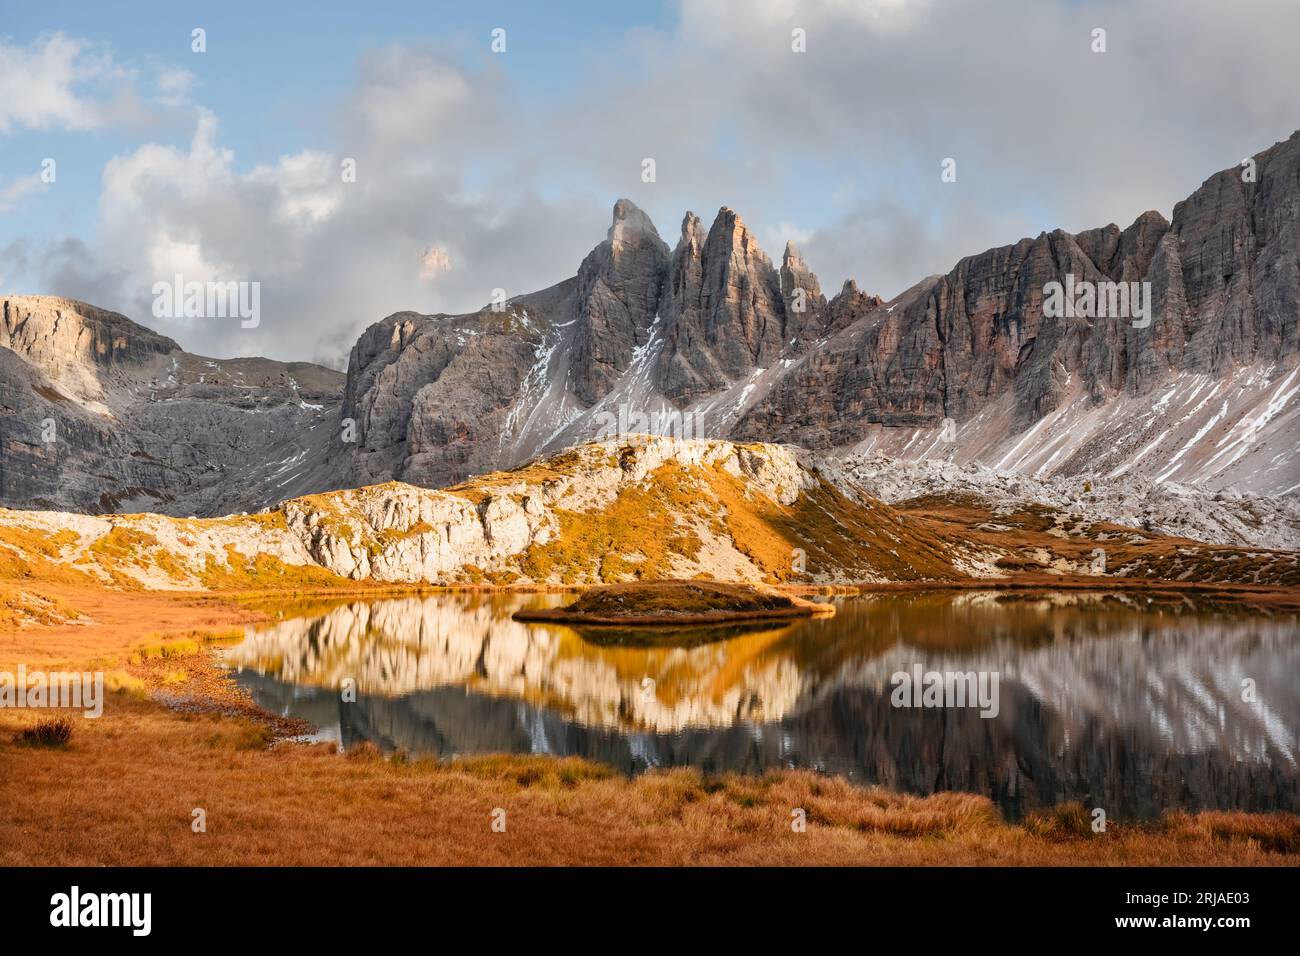 Clear turquoise water of alpine lake Piani in the Tre Cime Di Laveredo National Park, Dolomites, Italy. Picturesque landscape with snowy mountains, orange grass and small lake in autumn Dolomite Alps Stock Photo